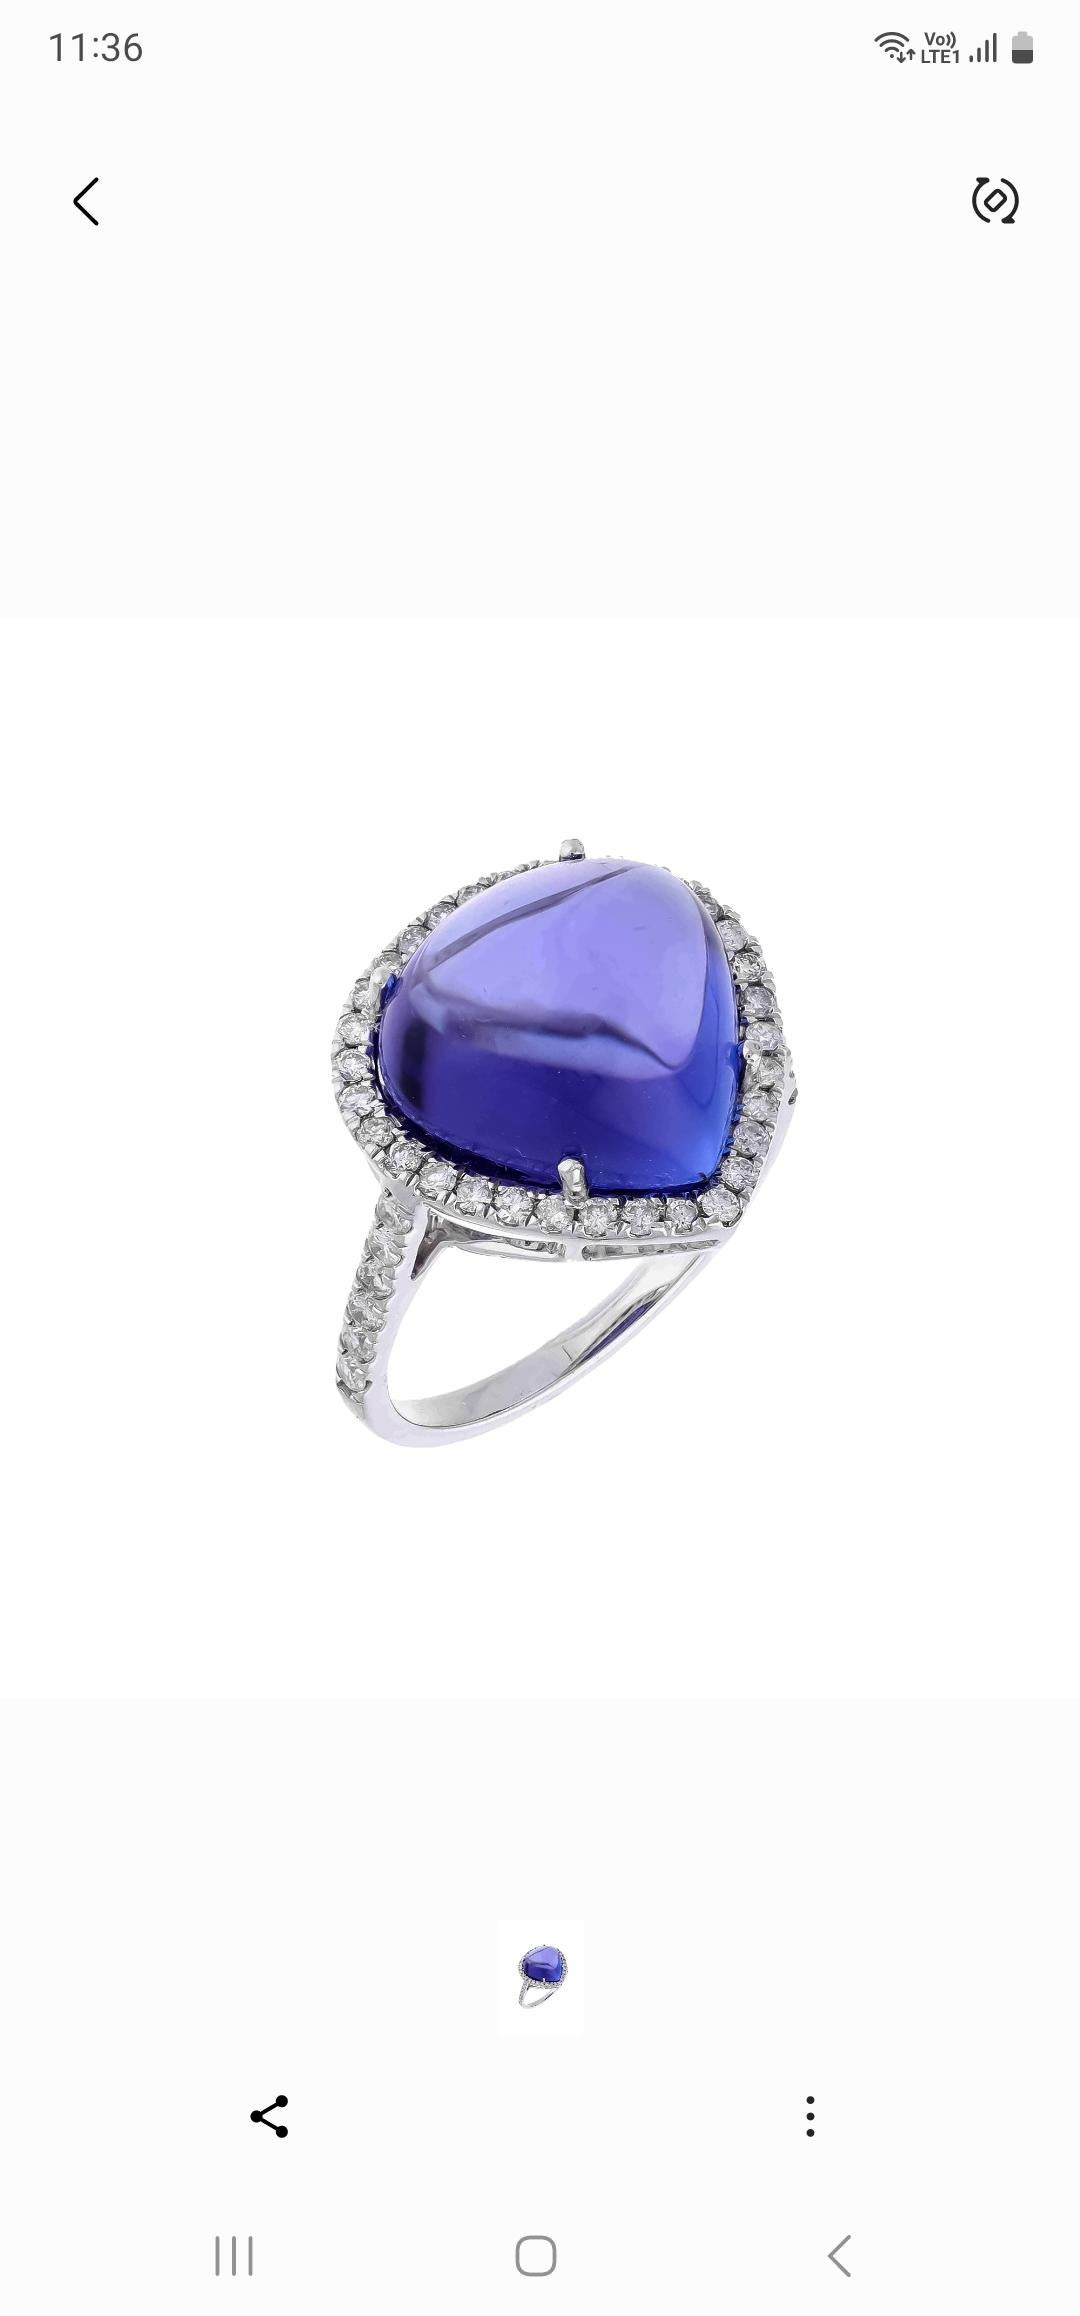 Antique Cushion Cut 10.10 Ct Natural Tanzanite Cabochon & 0.40 Ct Natural Diamond Ring in 18KW Gold For Sale